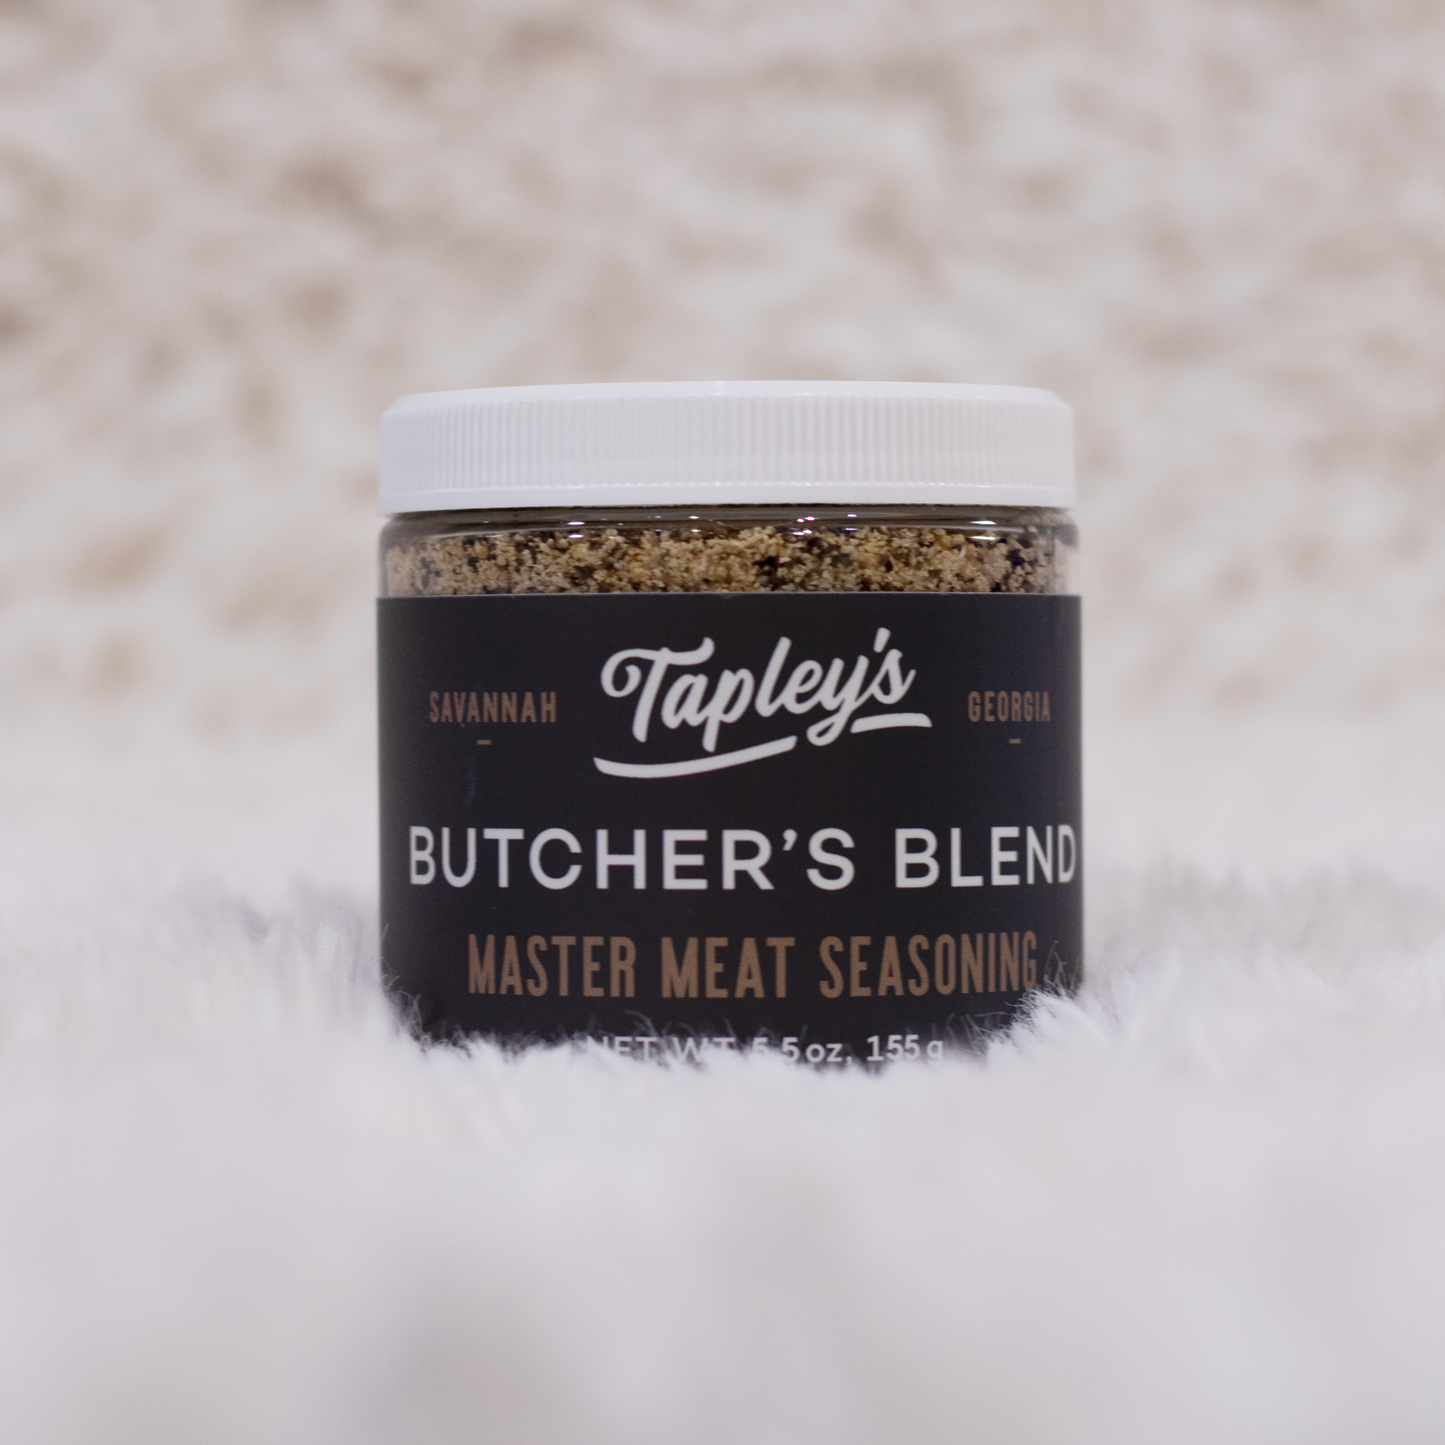 Butcher Blend Master Meat Seasoning - Tapley's - Local Brand